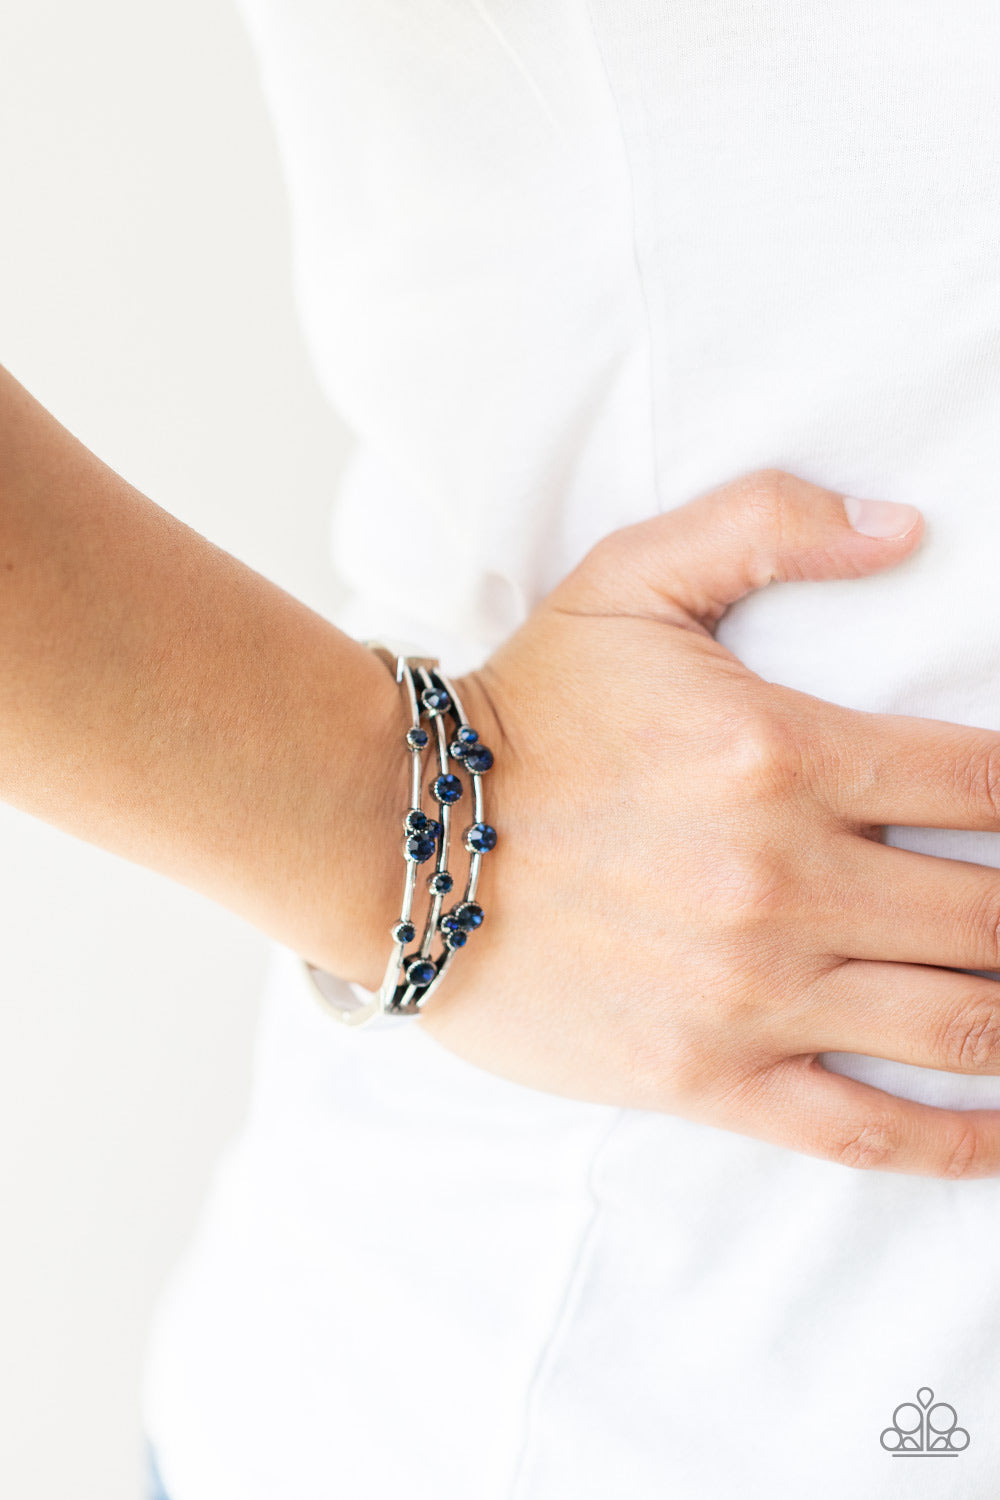 ​Cosmic Candescence - Blue Rhinestone - Silver - Hinged Closure Bracelet - Paparazzi Accessories - 
A smattering of glittery blue rhinestones adorn three silver bars that coalesce into a versatile silver cuff-like bangle around the wrist. Features a hinged closure.
Sold as one individual bracelet.
